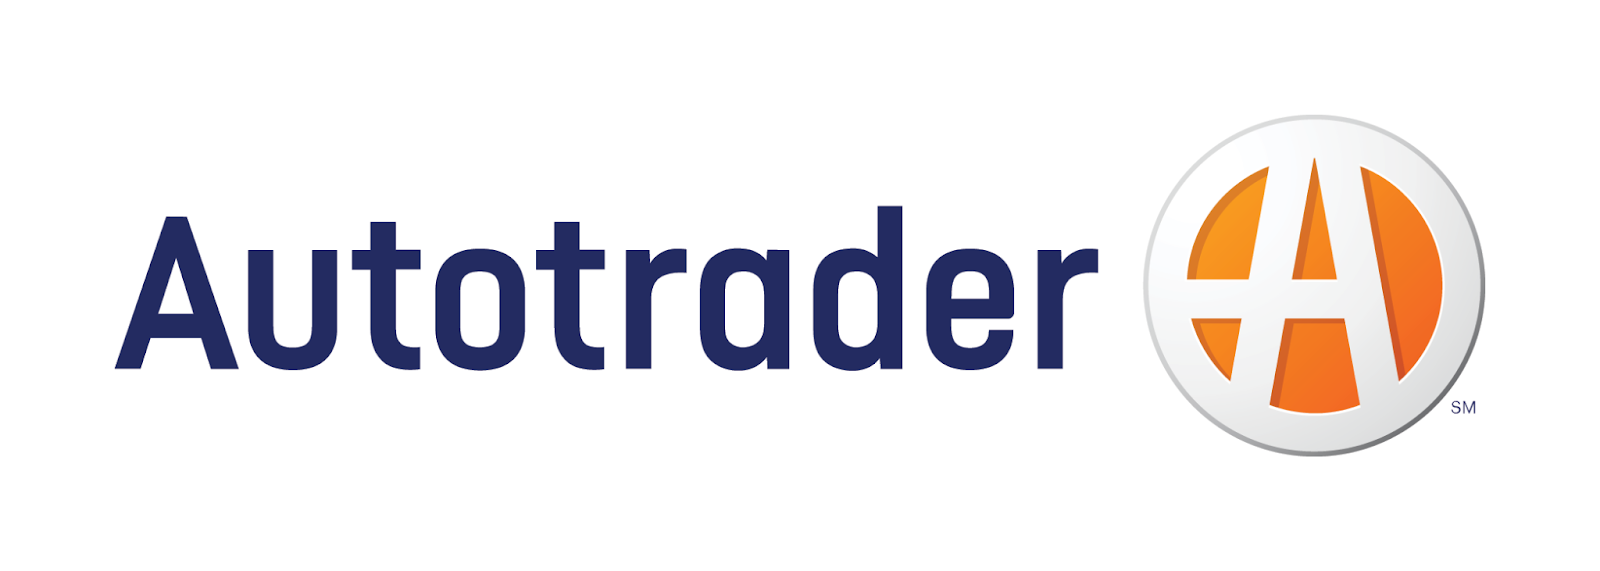 Picture of Autotrader logo